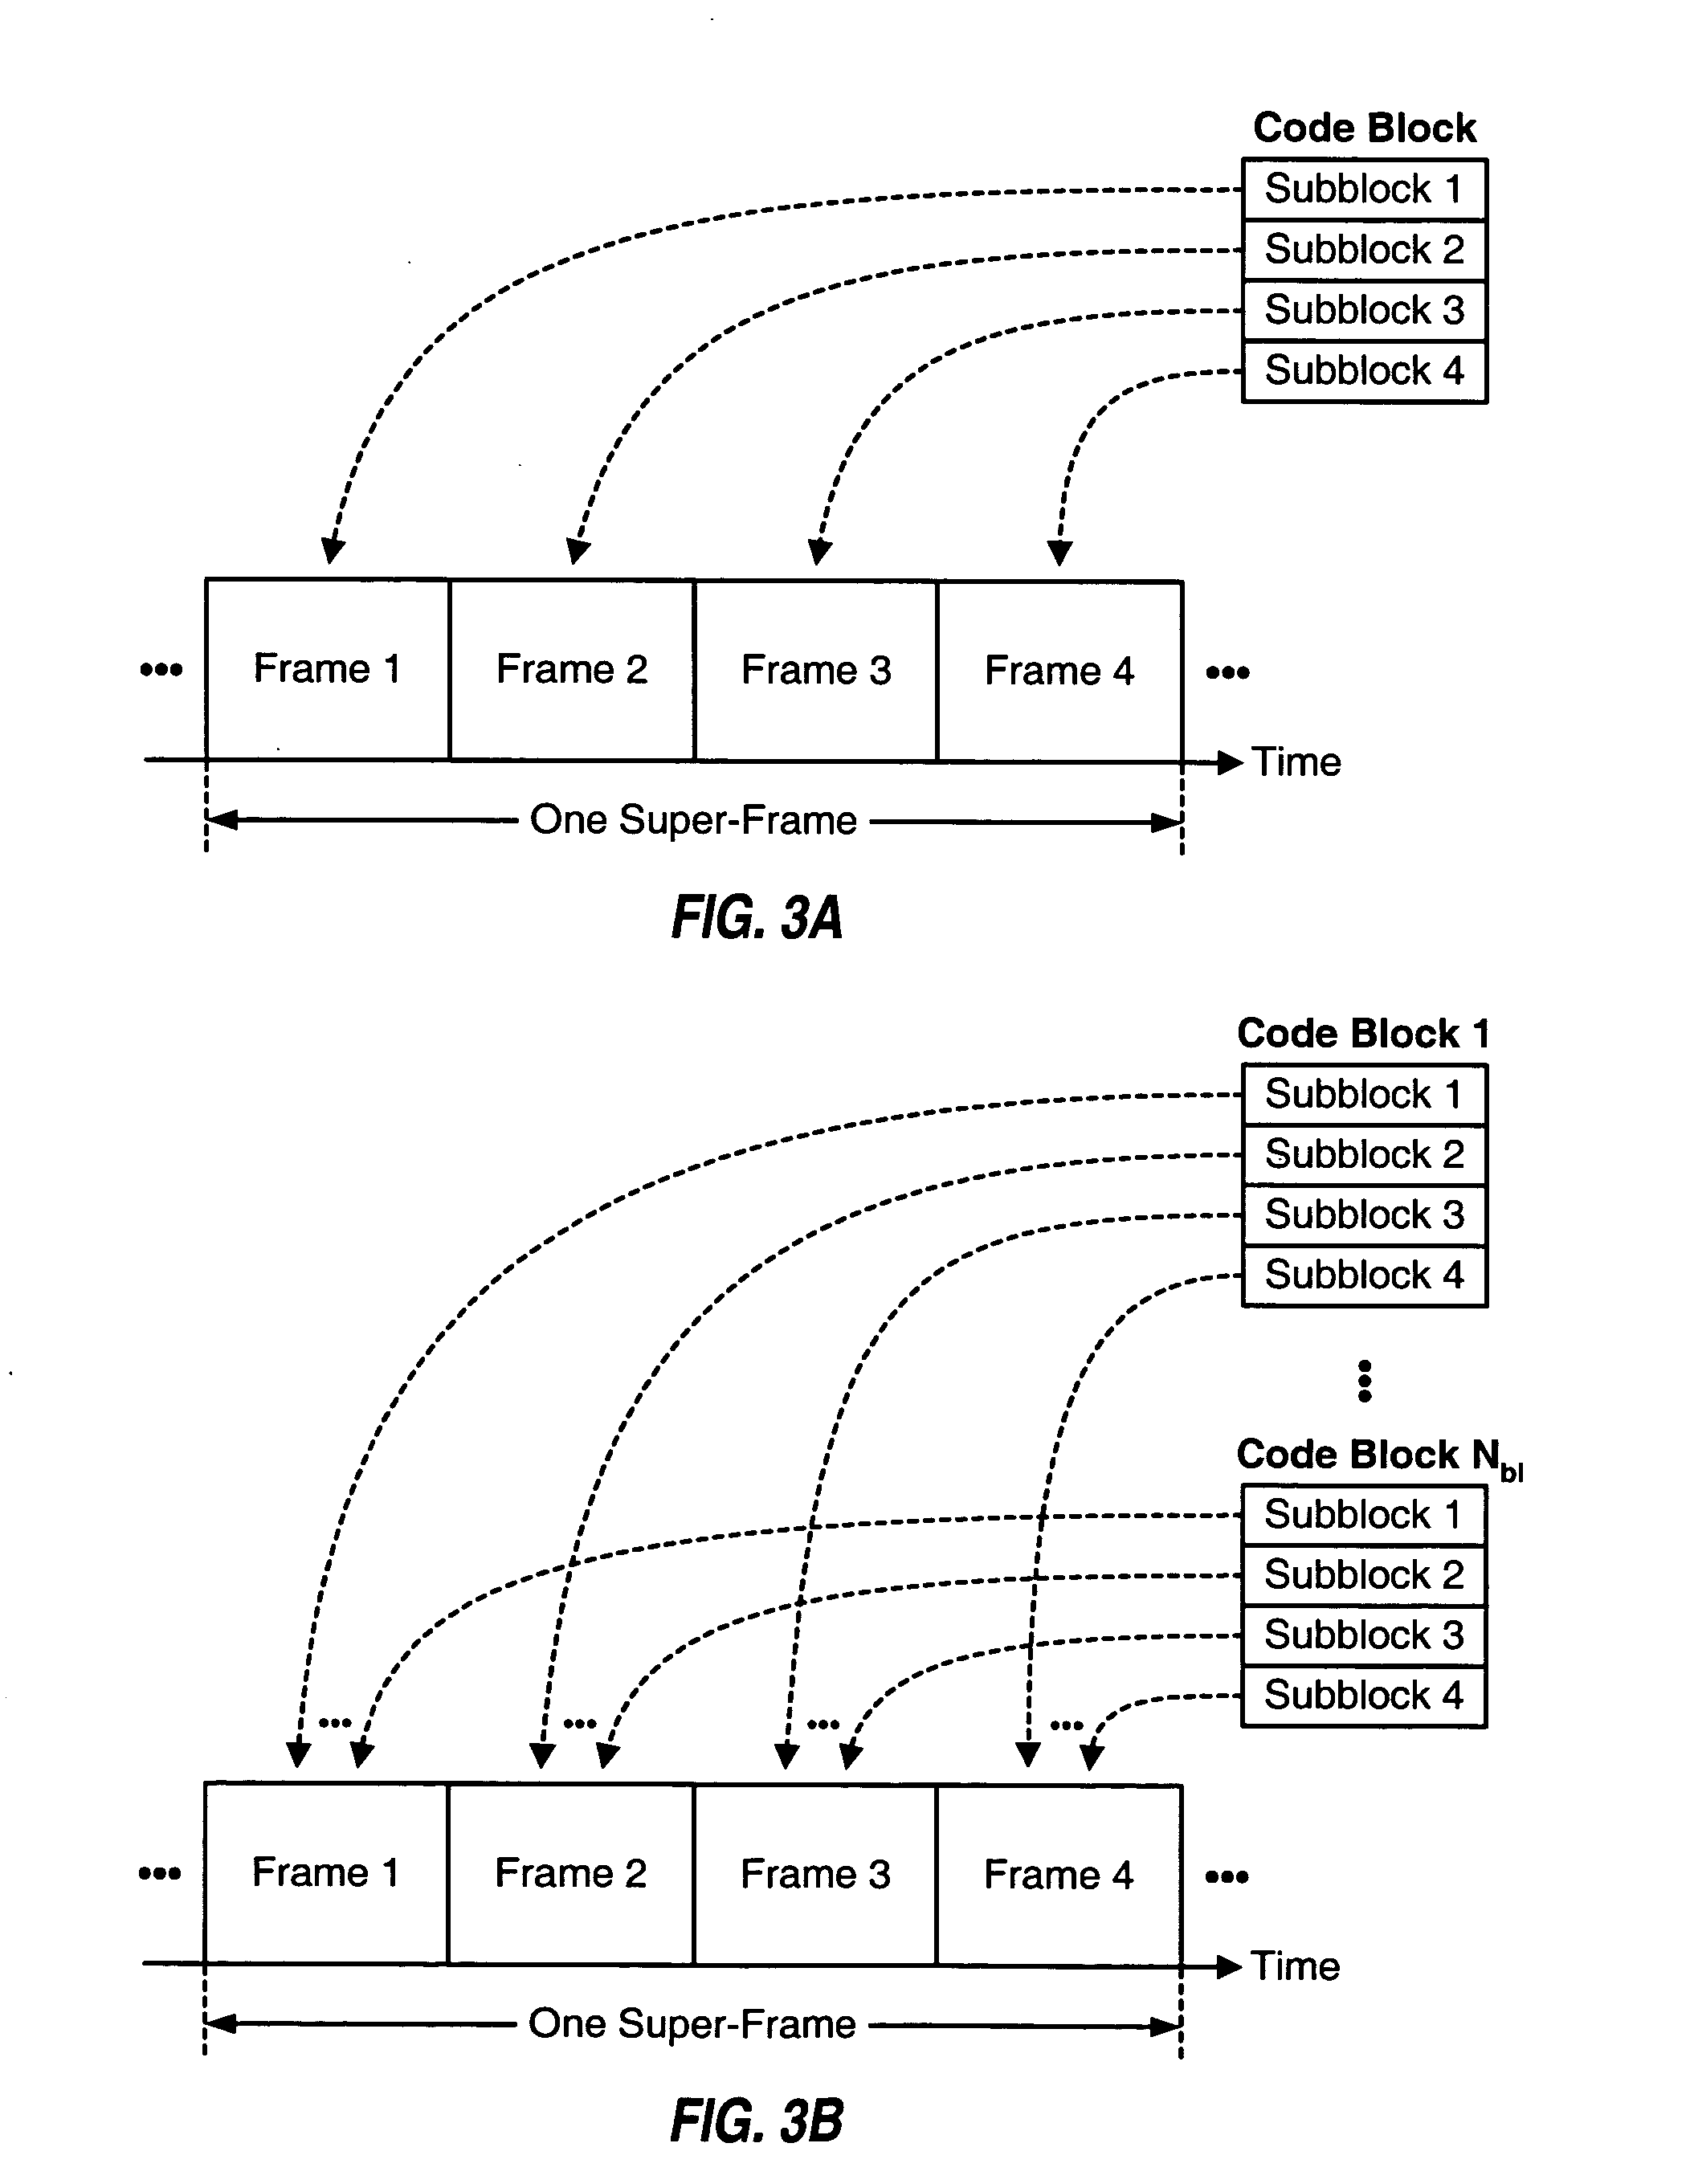 Multiplexing and transmission of multiple data streams in a wireless multi-carrier communication system